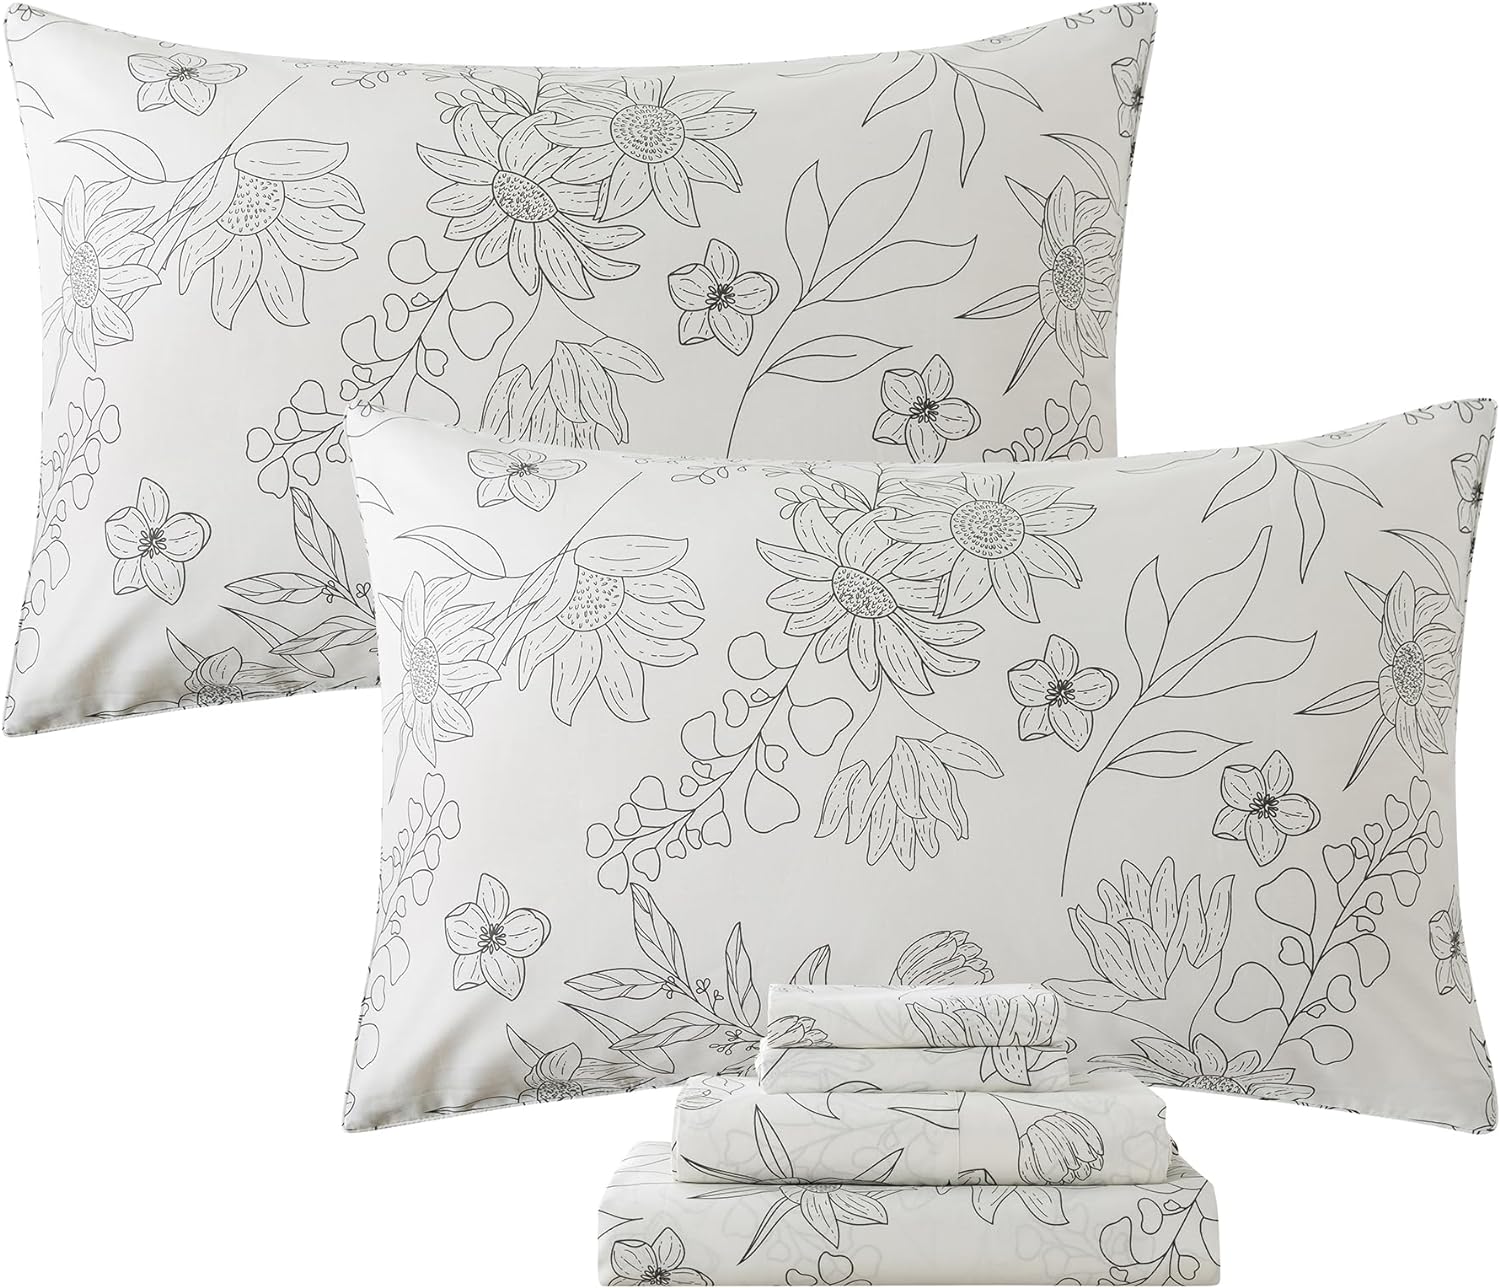 FADFAY Black and White Sheets Set Queen Vintage Sunflower Bedding Shabby White Floral Sheets Elegant Farmhouse Floral Bedding 100% Cotton Soft Bedding with Deep Pocket Fitted Sheet 4Pcs, Queen Size